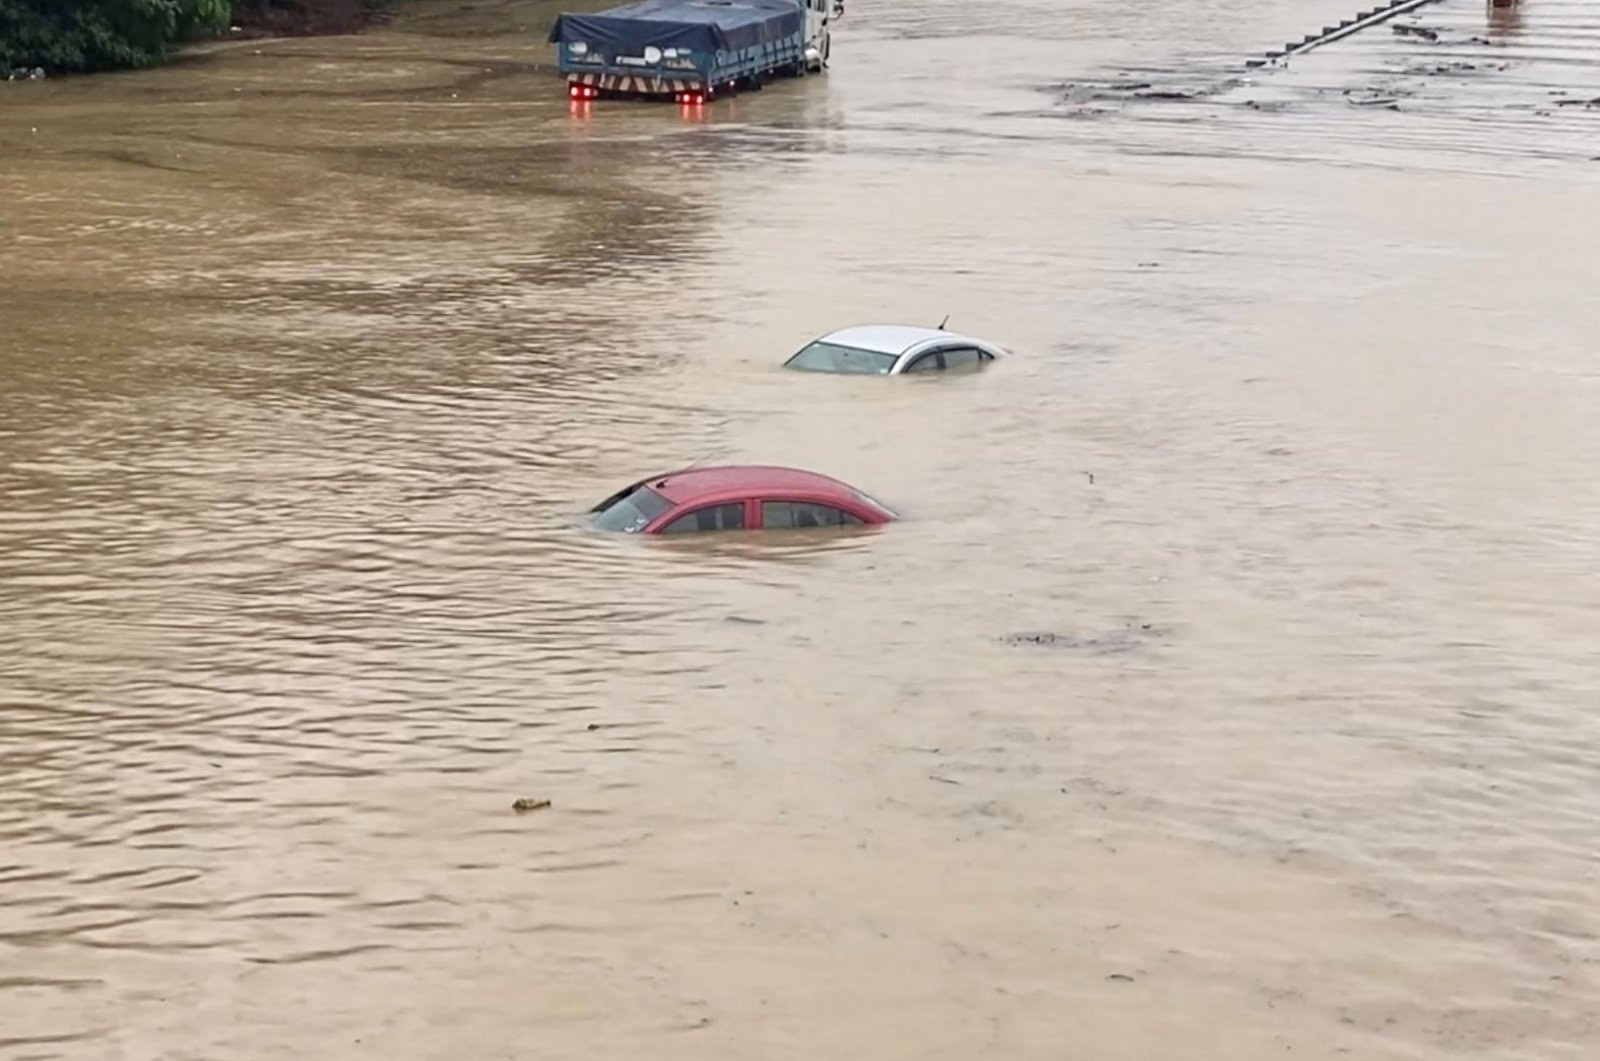 Partially submerged cars are seen on a flooded road in Shah Alam, Malaysia, Dec. 18, 2021. (Reuters)